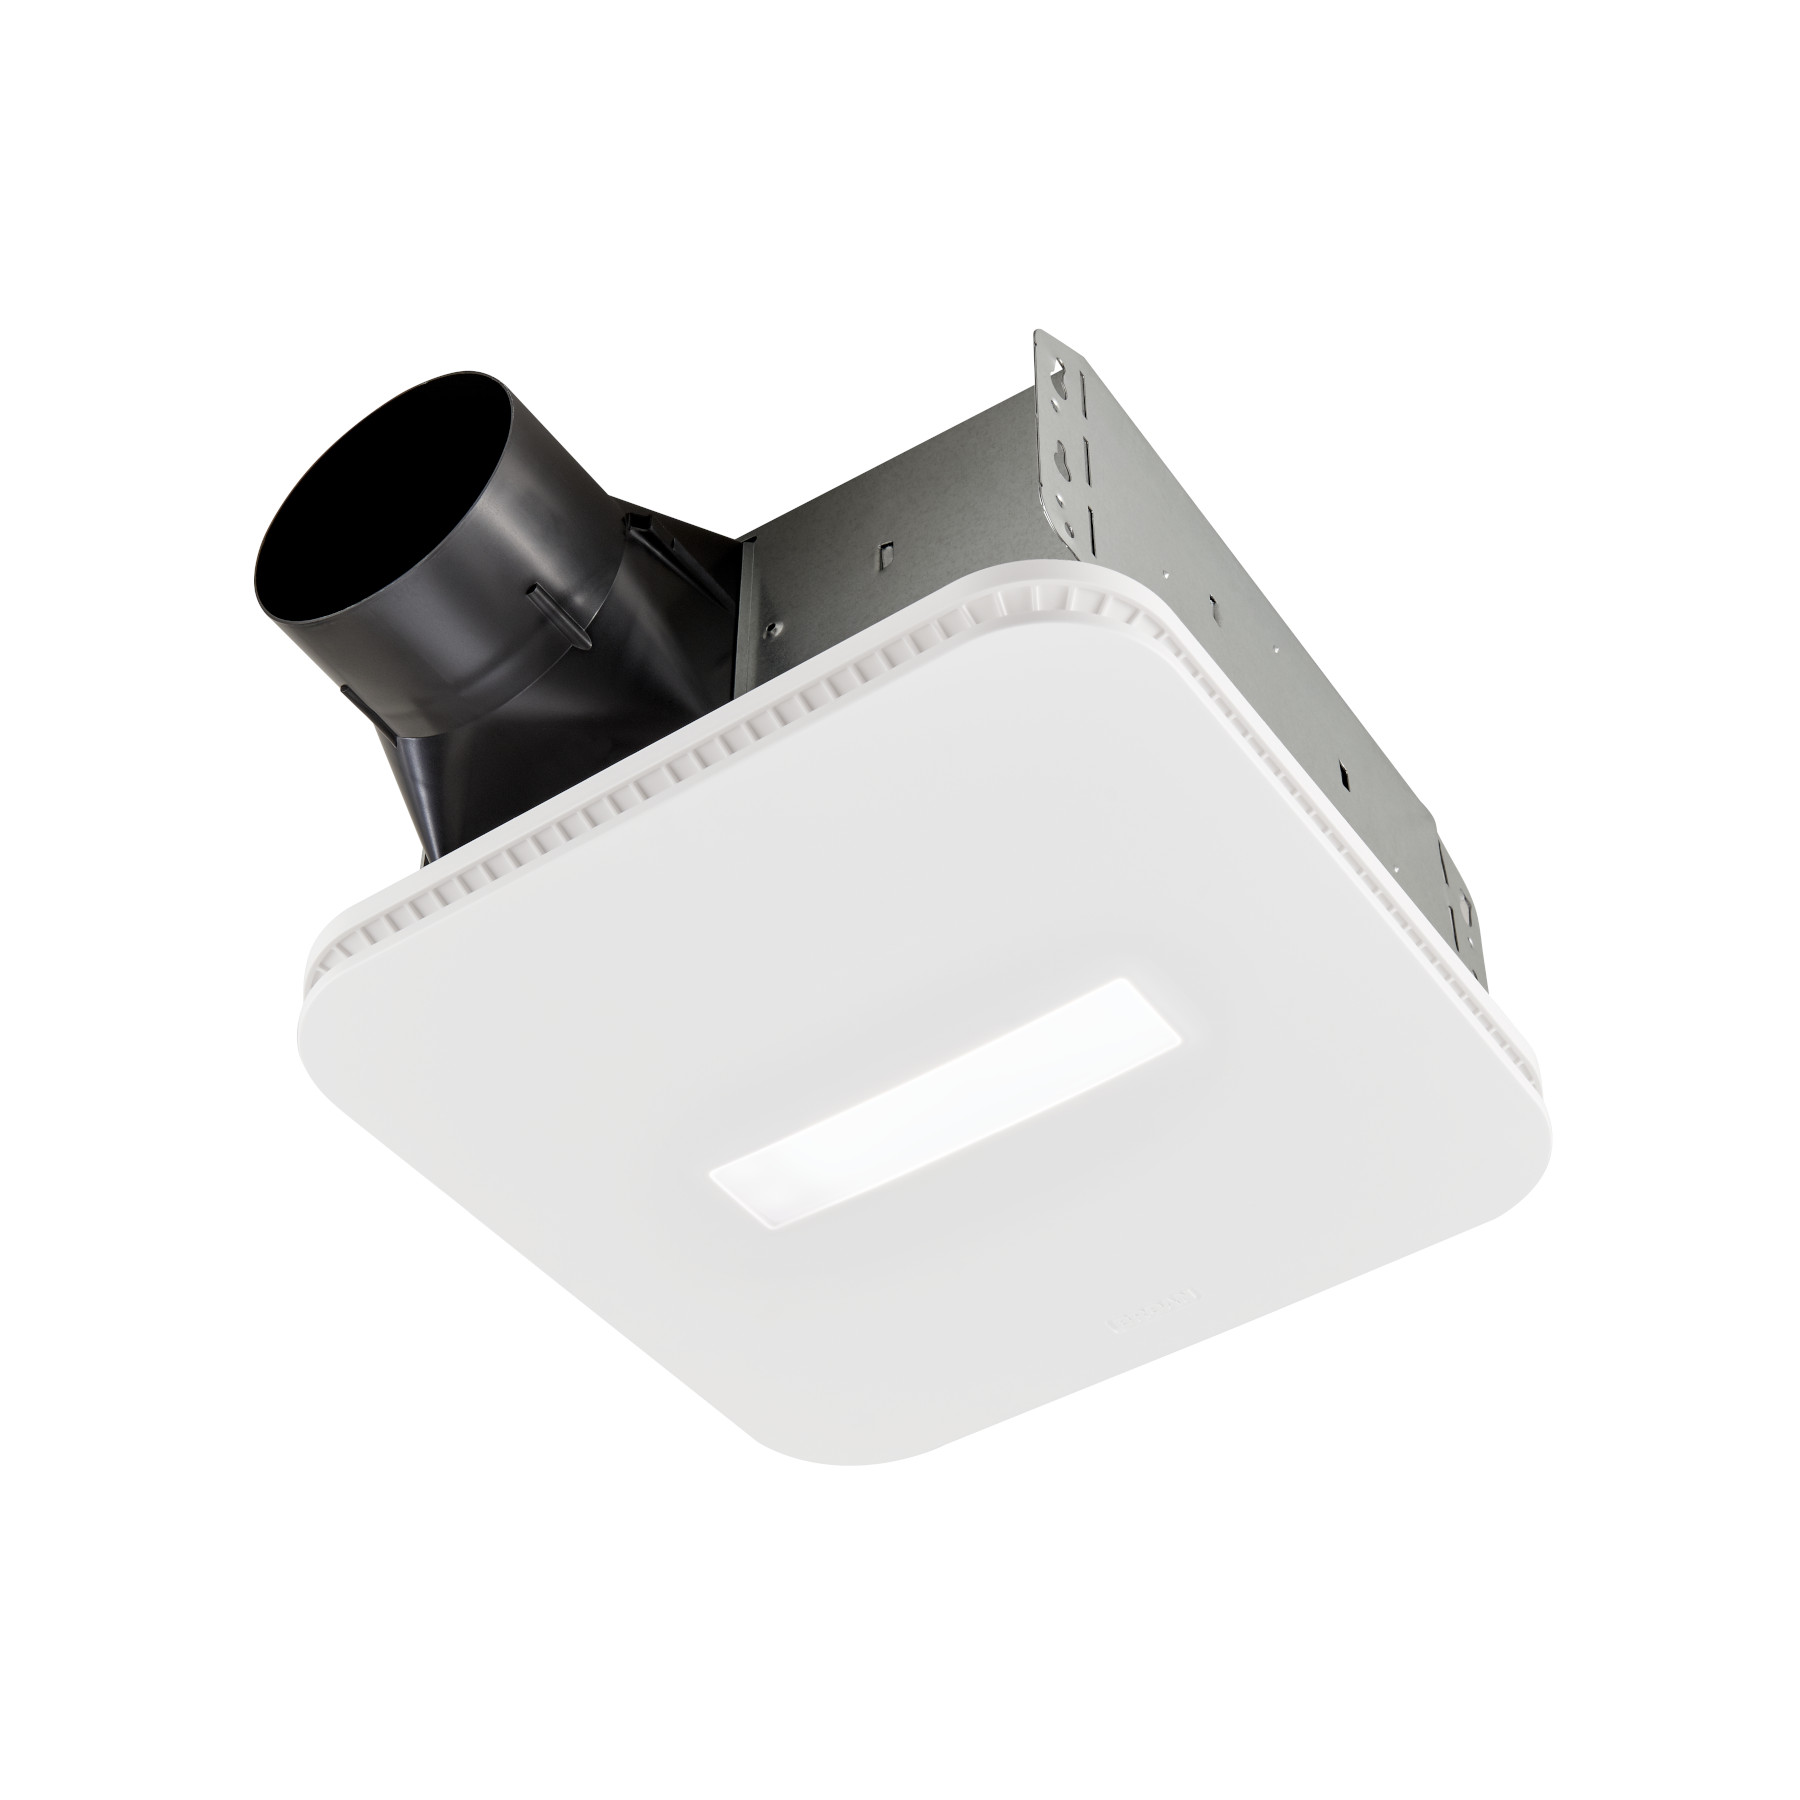 Ae110lk 110 Cfm Bathroom Exhaust Fan With Led Lighted Cleancover Grille